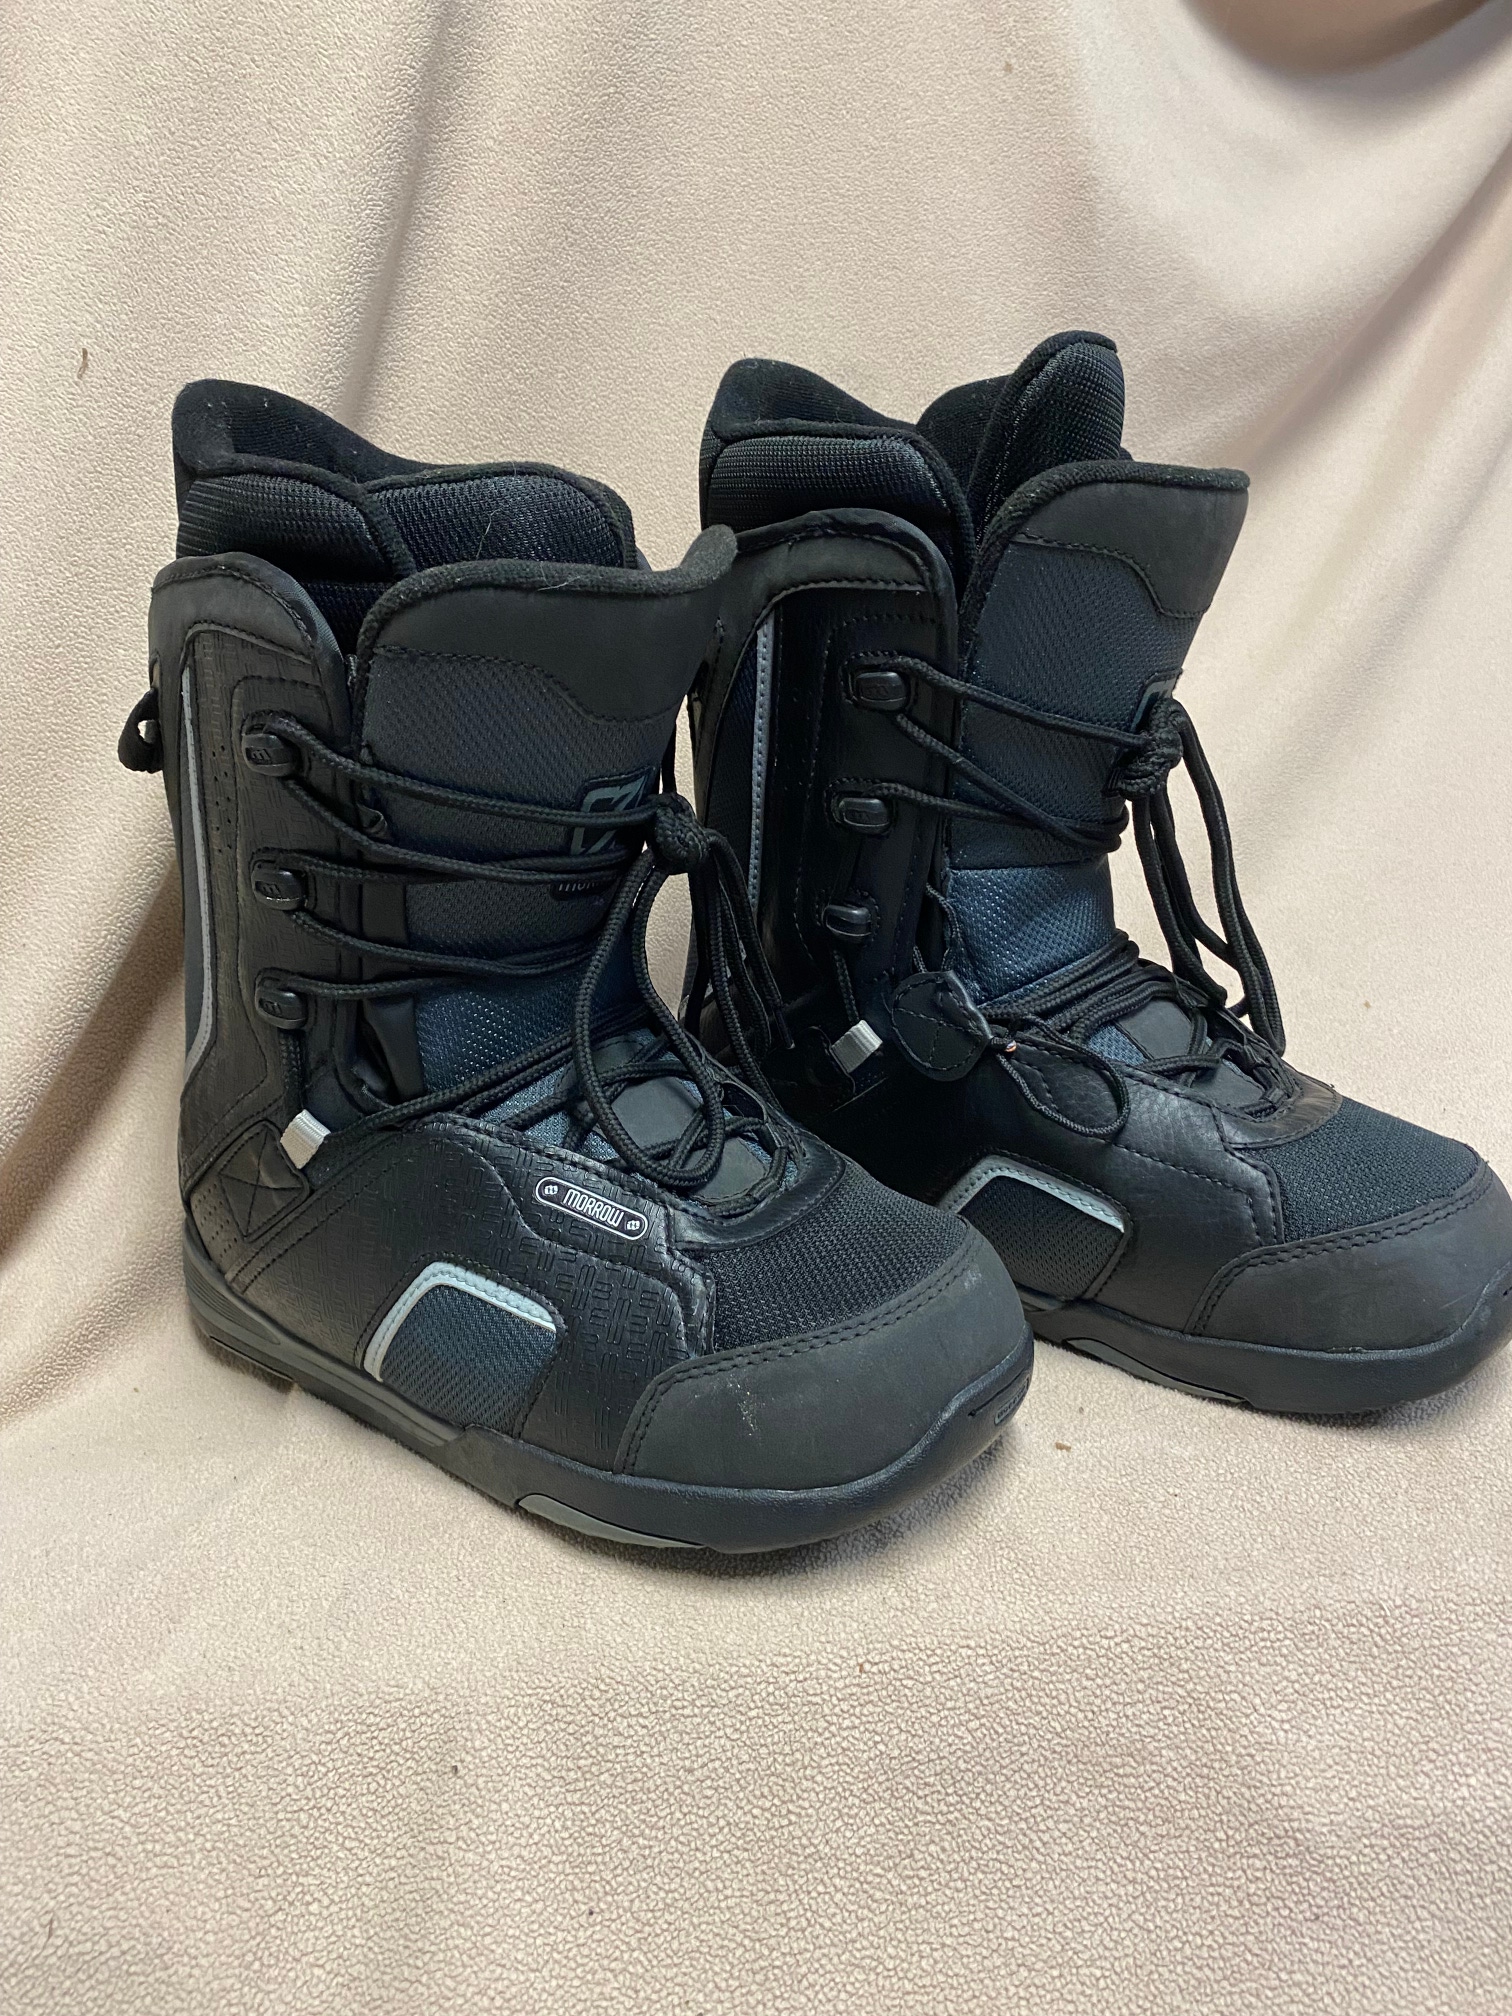 Men's Used Size 10 (Women's 11) Morrow Snowboard Boots All Mountain